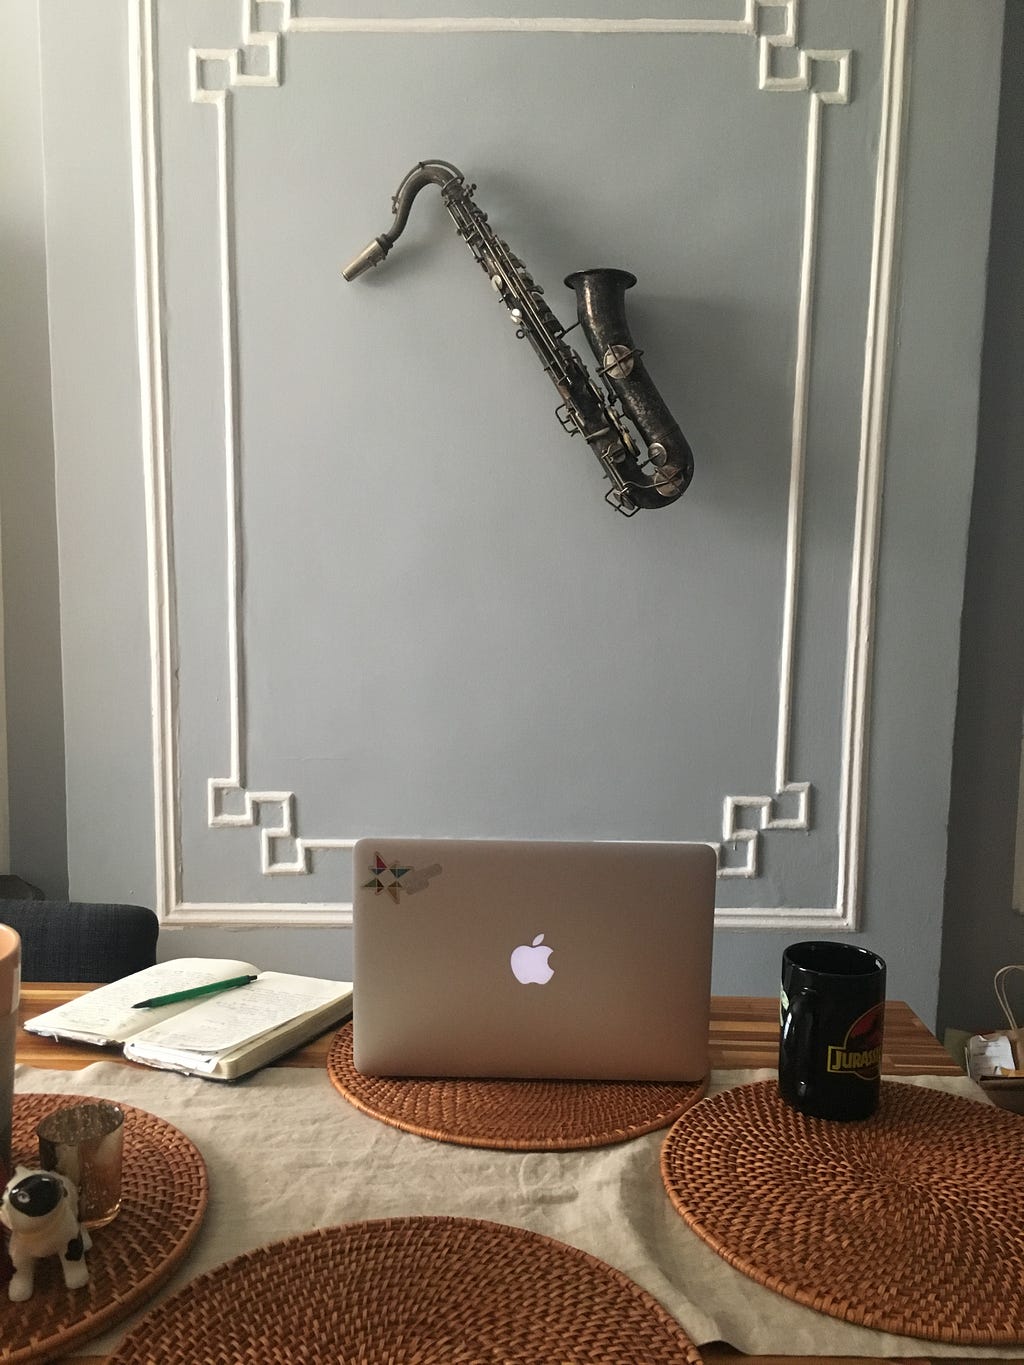 A saxophone hanging on a grey wall with a laptop open on a desk